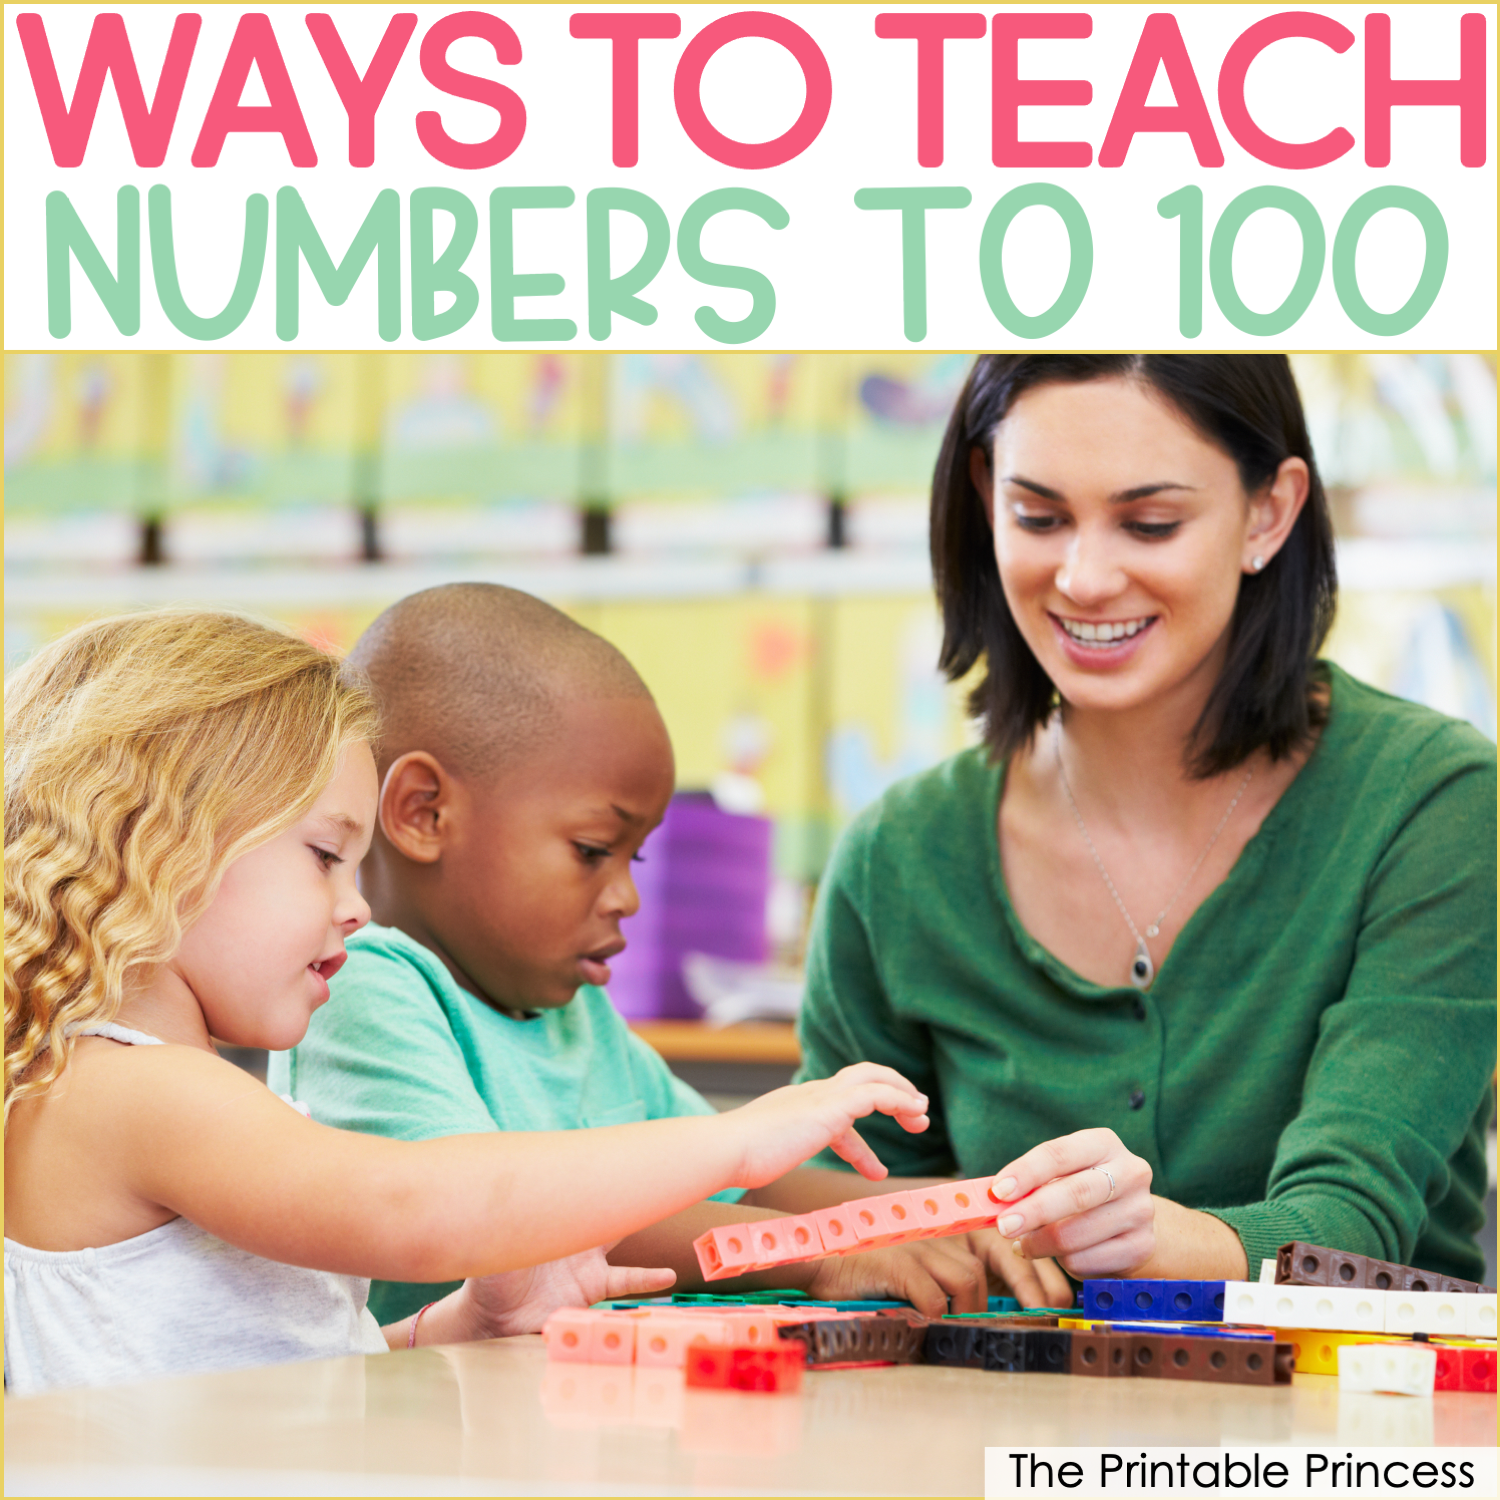 8 Activities for Teaching Numbers to 100